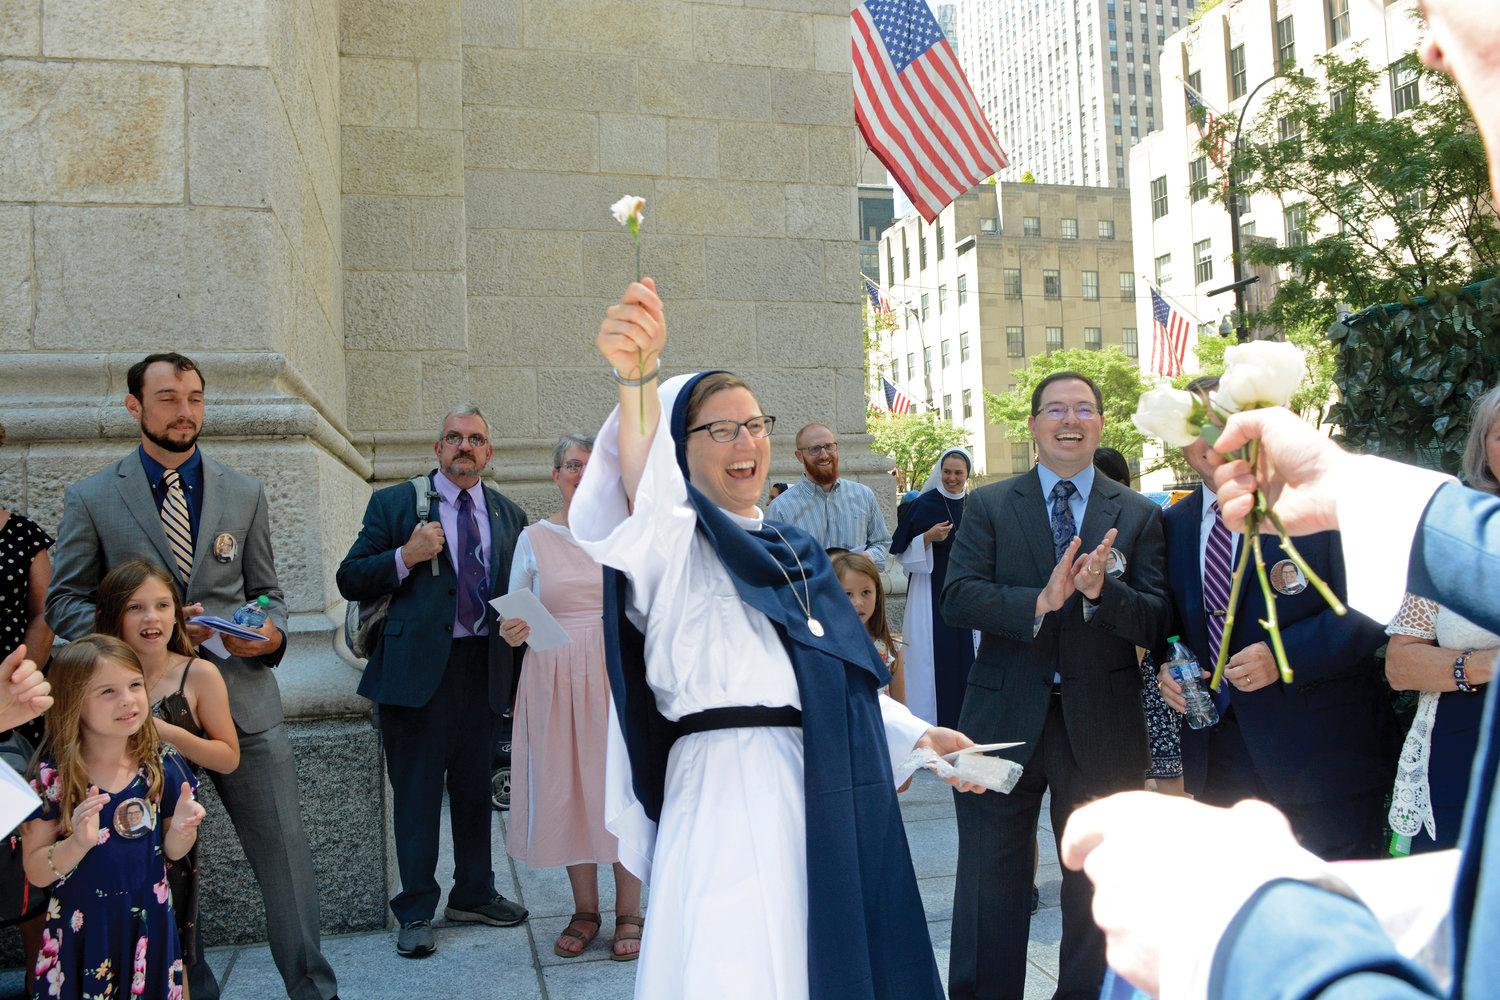 Sister Gemma Grace Marie, S.V., celebrates outside St. Patrick’s Cathedral on Aug. 6 after professing final vows with the Sisters of Life during a Mass celebrated by Cardinal Dolan.